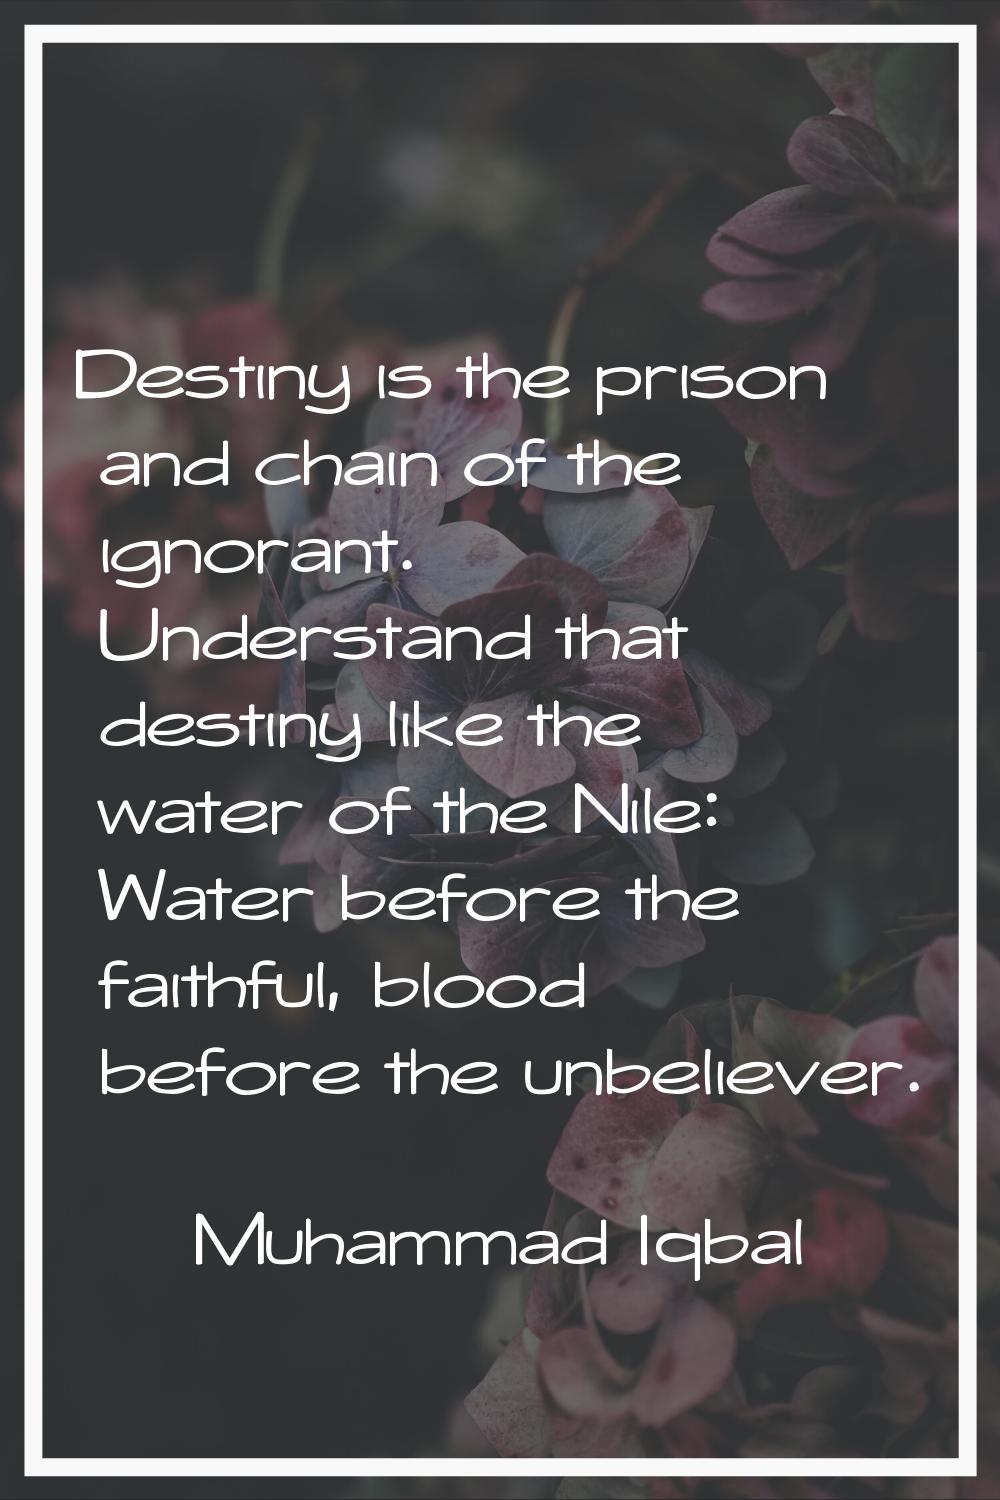 Destiny is the prison and chain of the ignorant. Understand that destiny like the water of the Nile